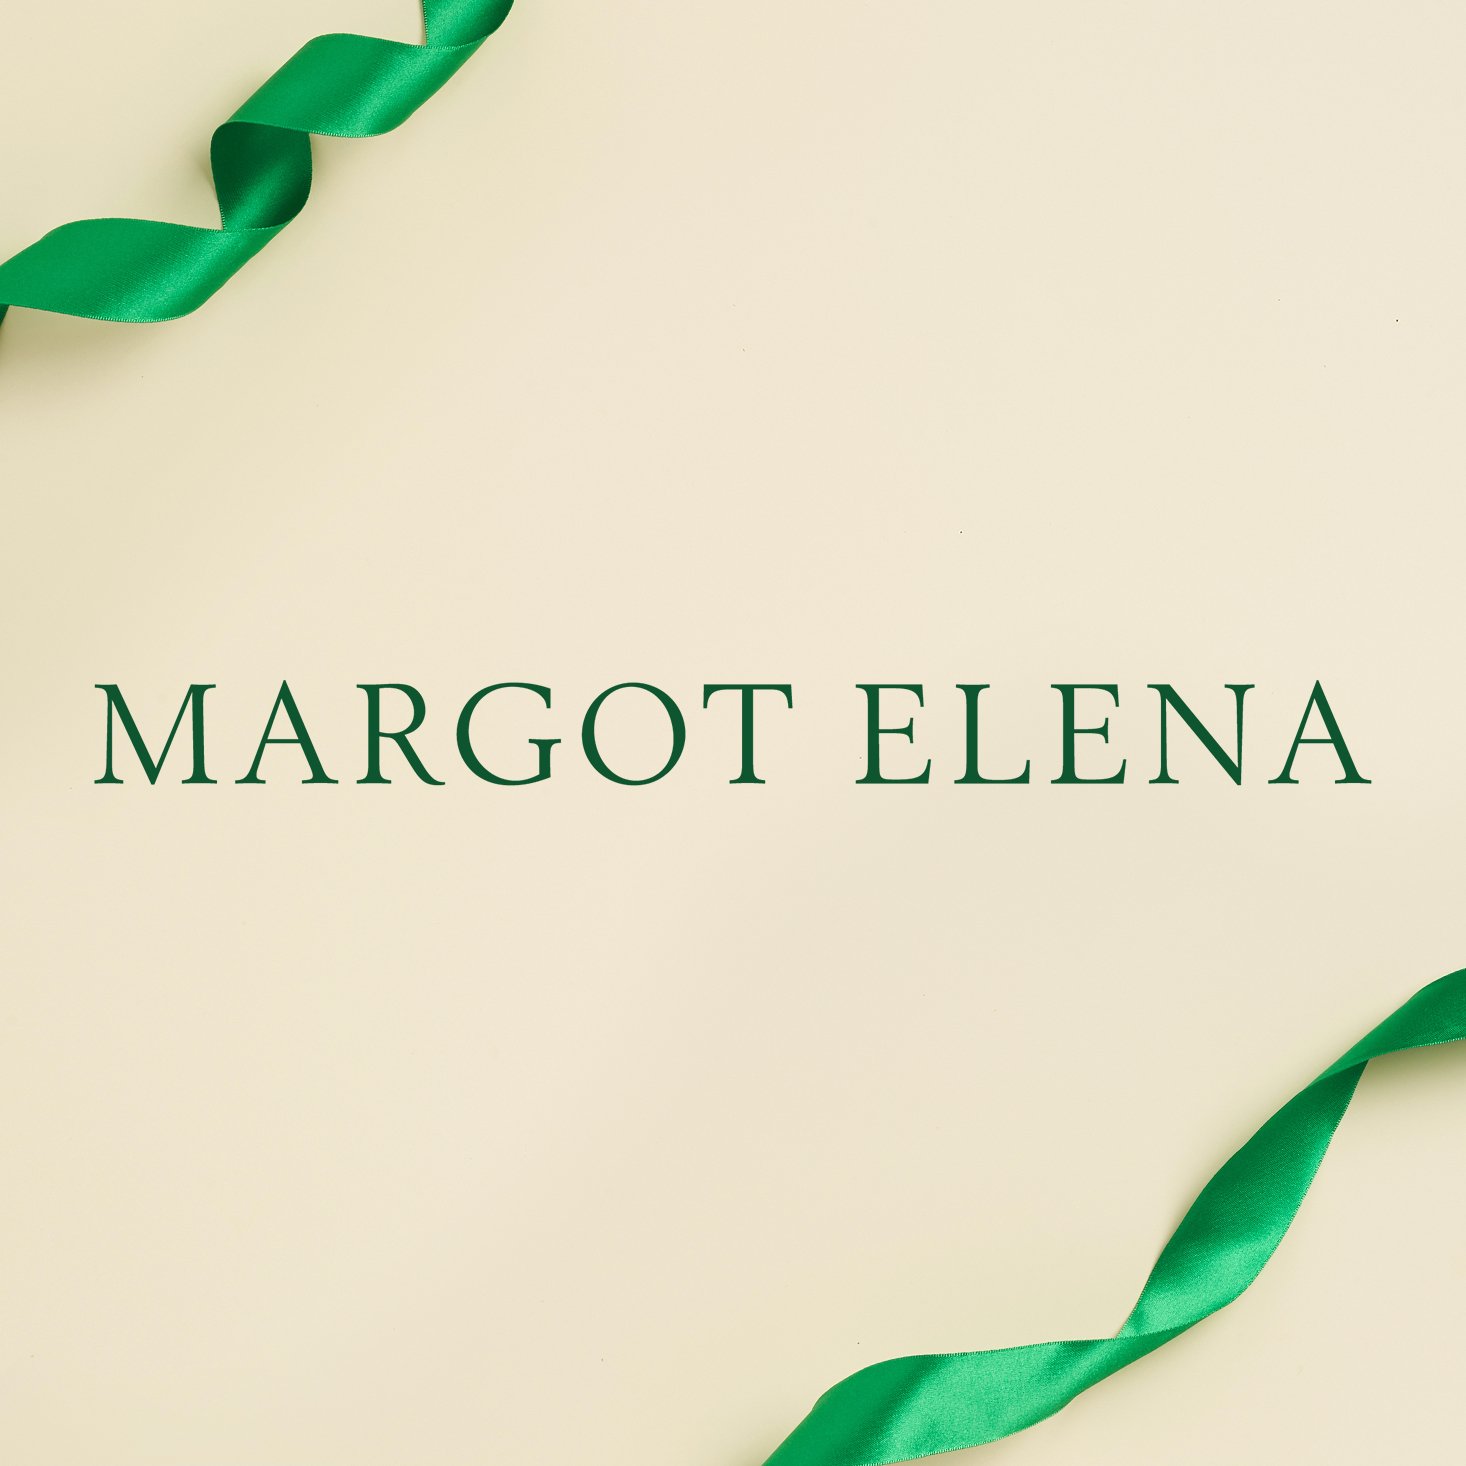 Margot Elena Sale – 20% OFF Select Body Butters and Lotions!